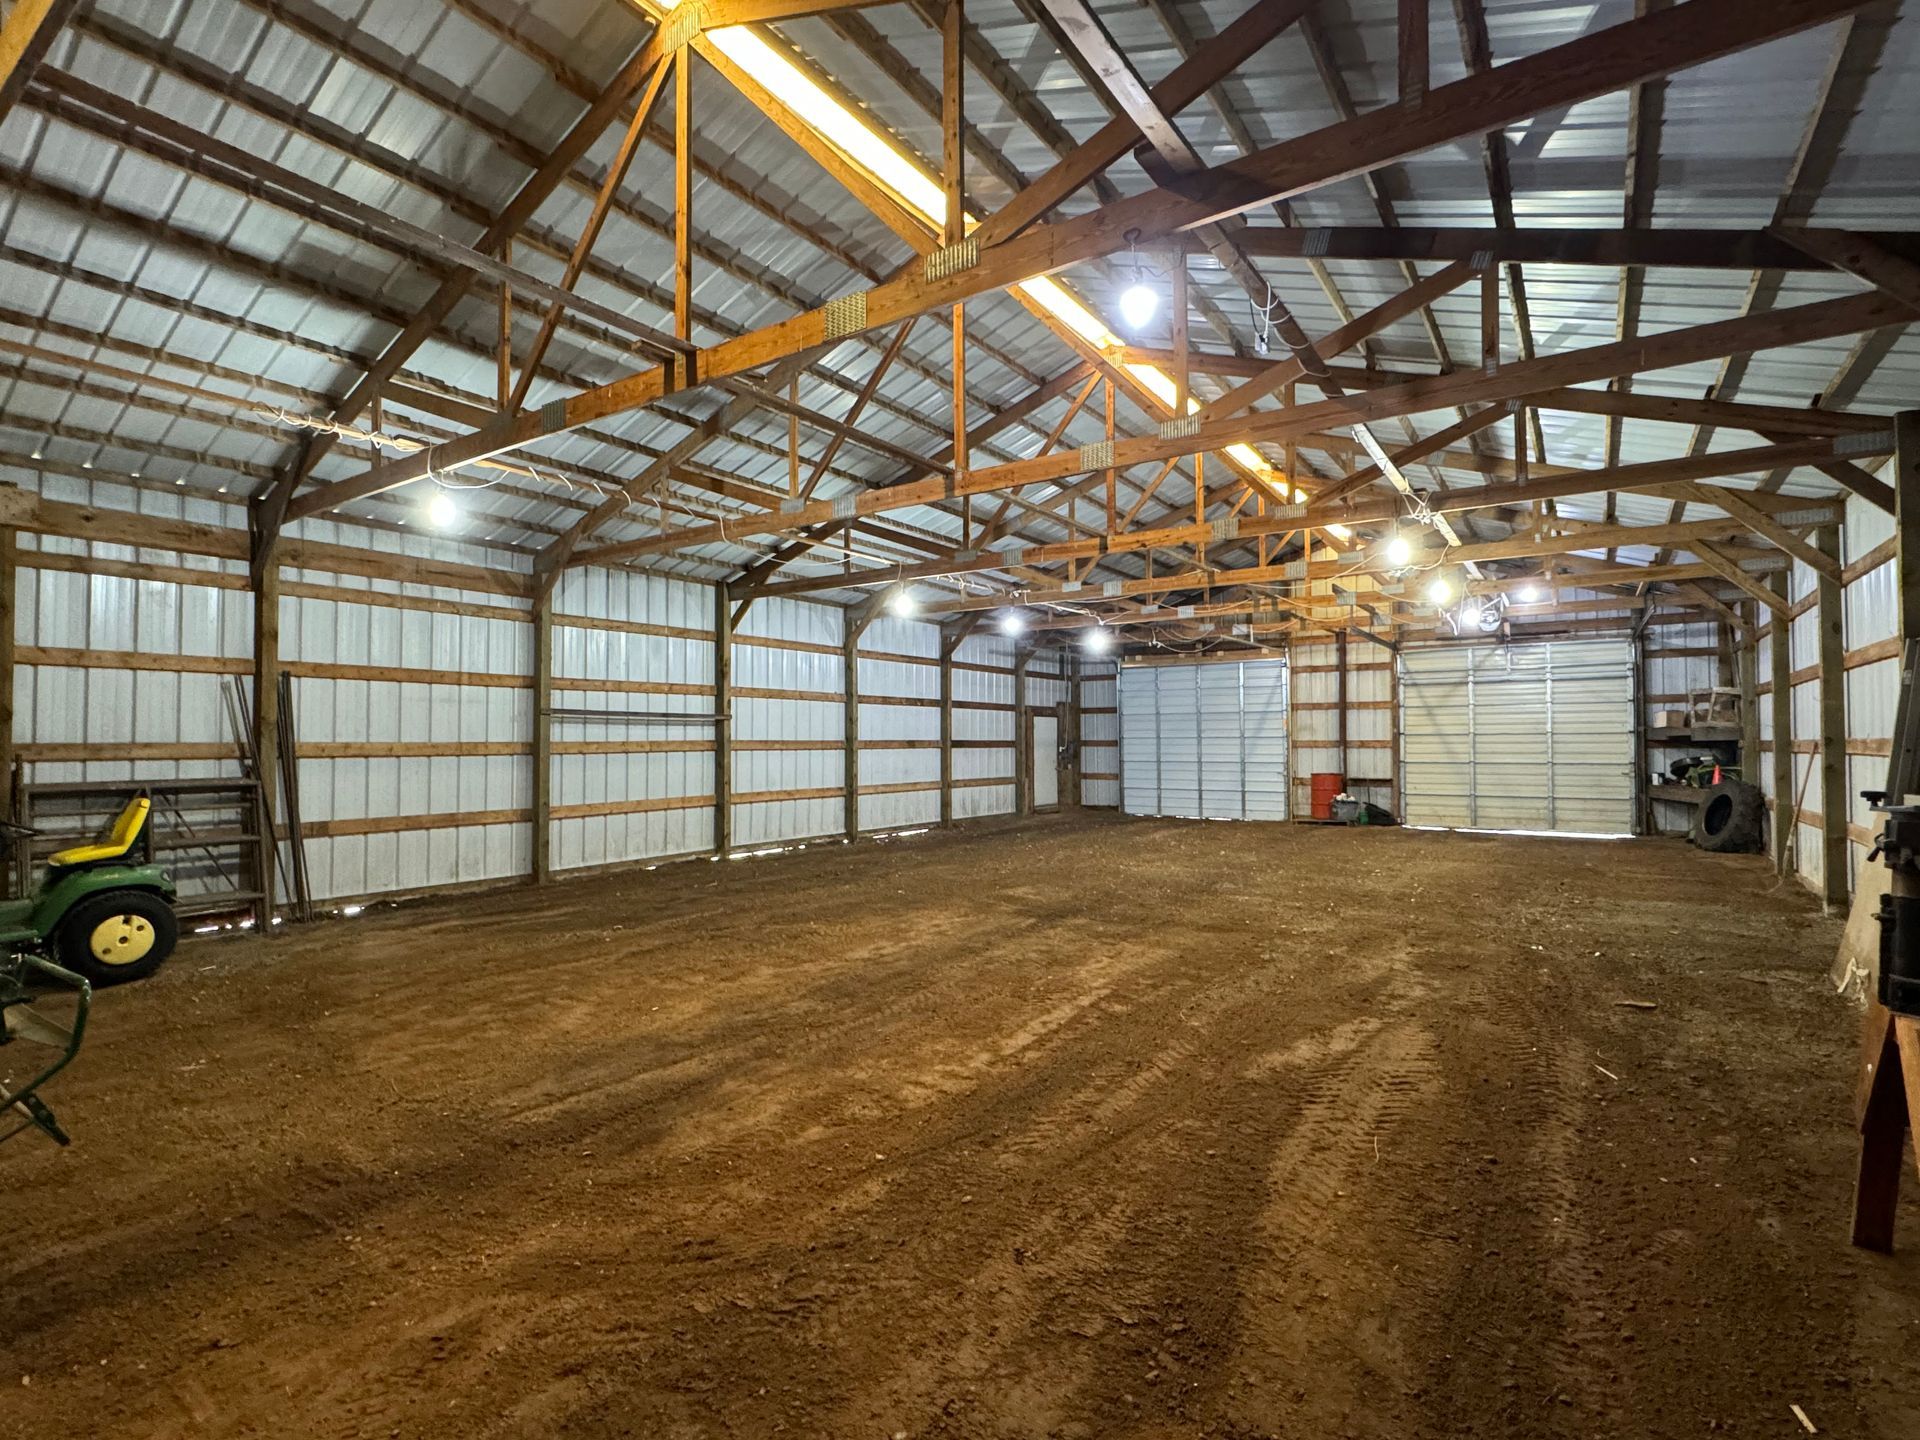 A large empty barn with a tractor parked inside of it.